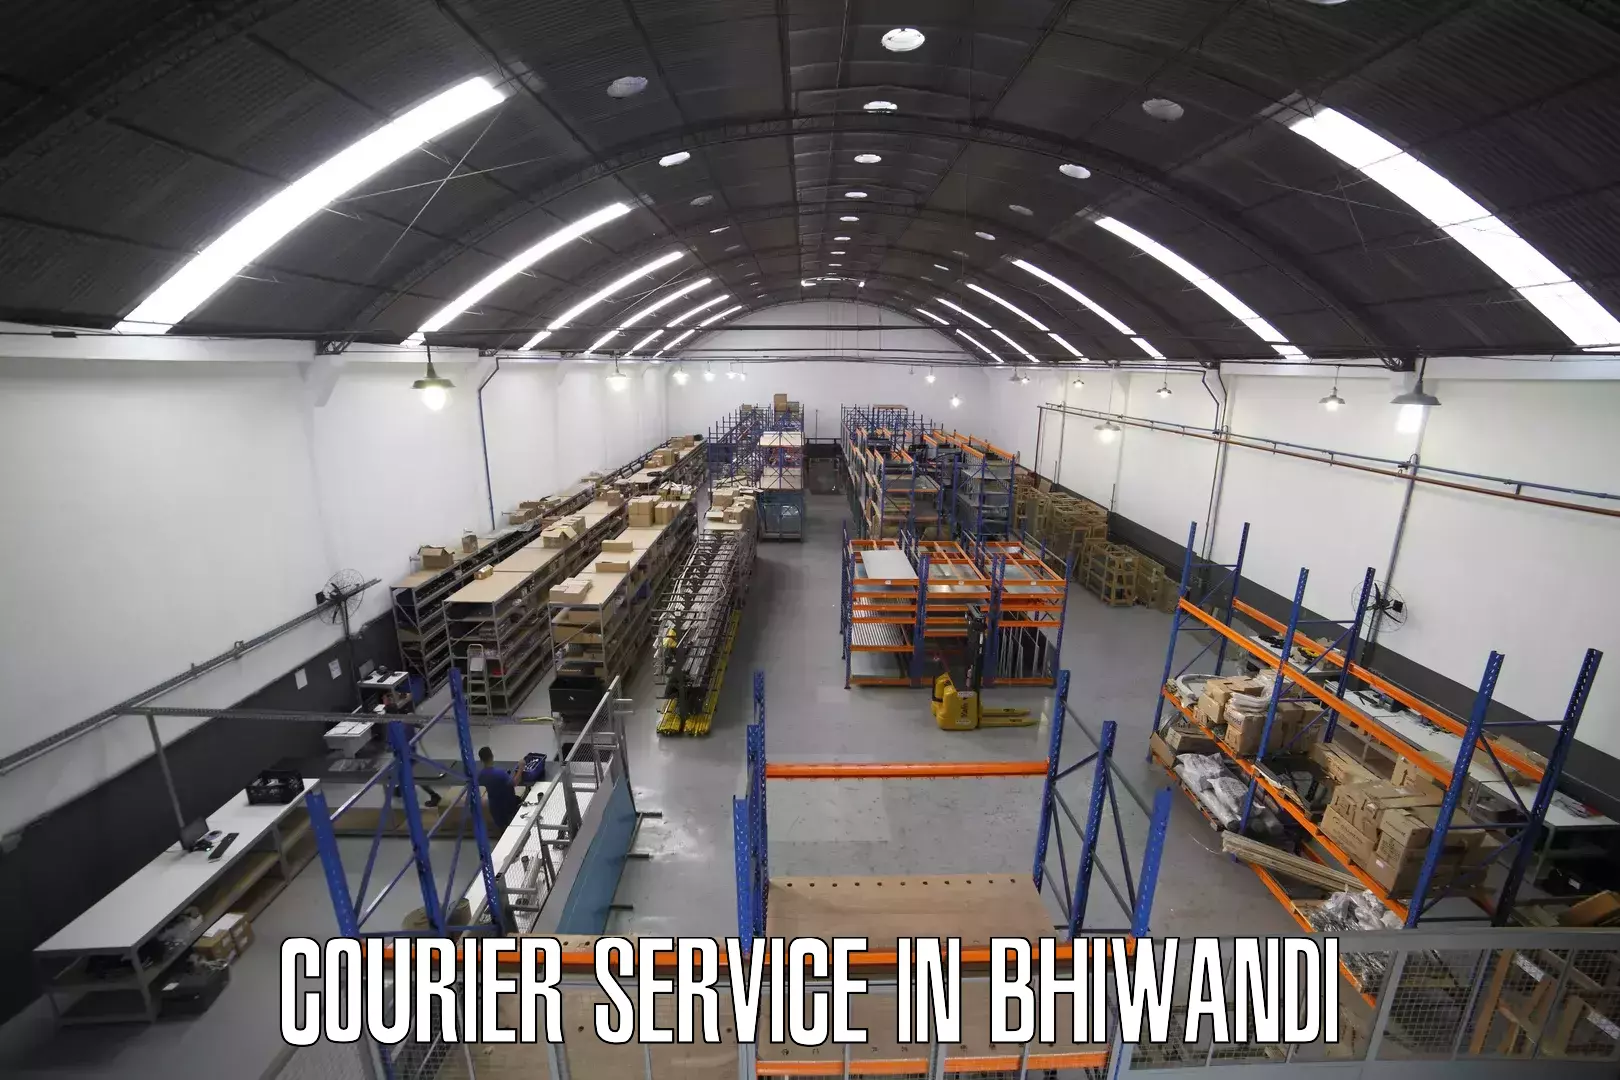 Weekend courier service in Bhiwandi